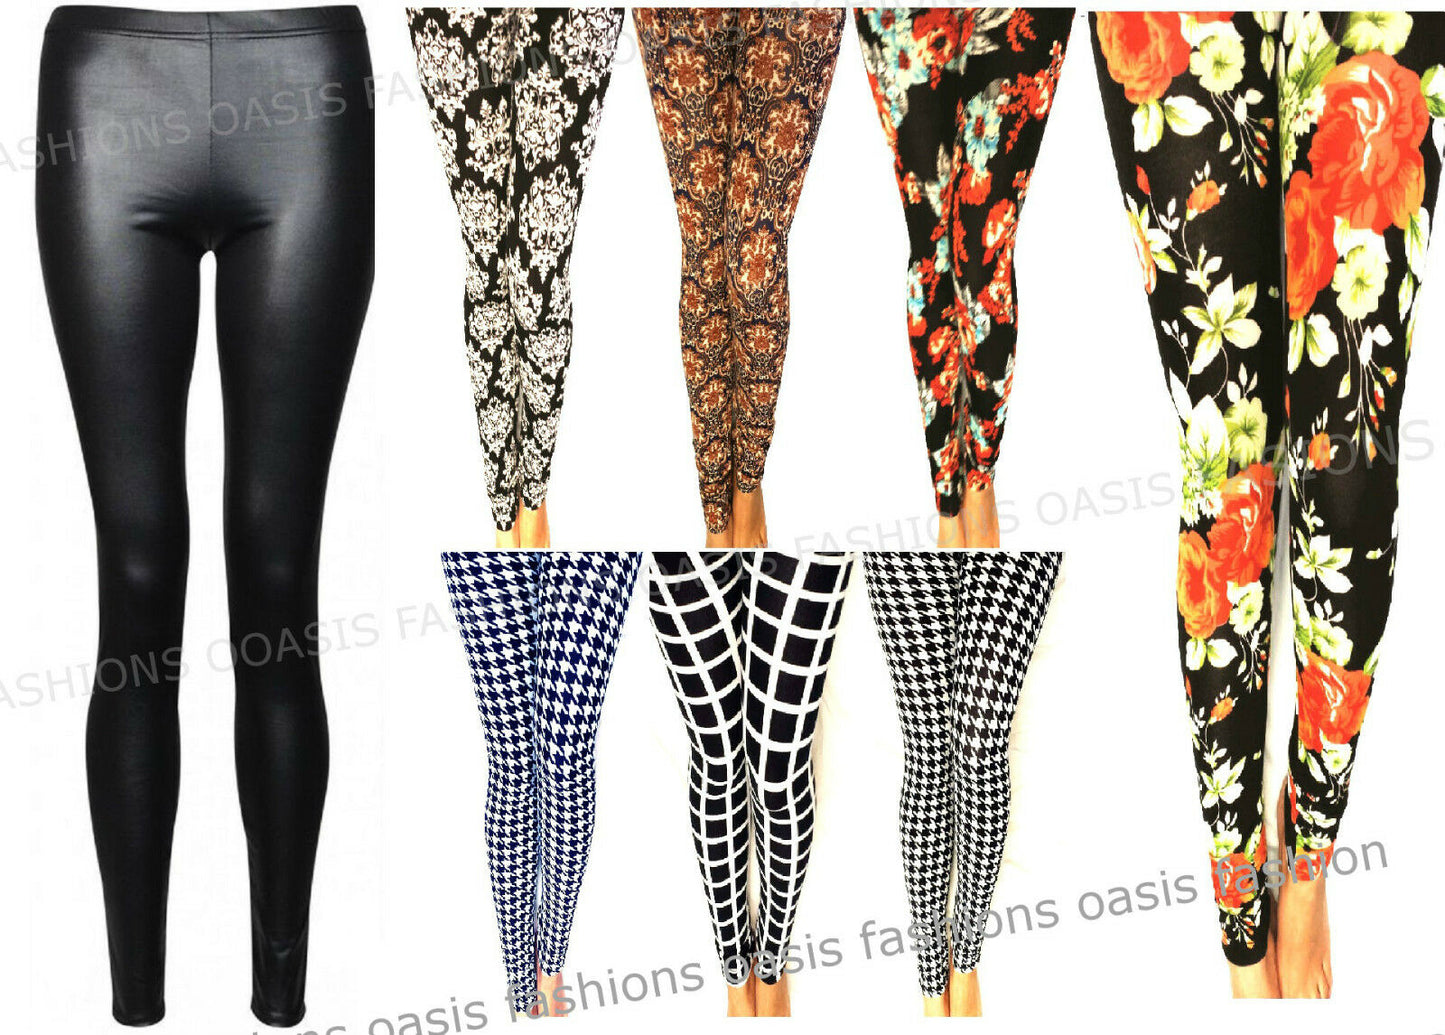 ladies Patterned Leggings. Available In Multiple Designs. Sizing Starts At Small To Large (UK 8-14)